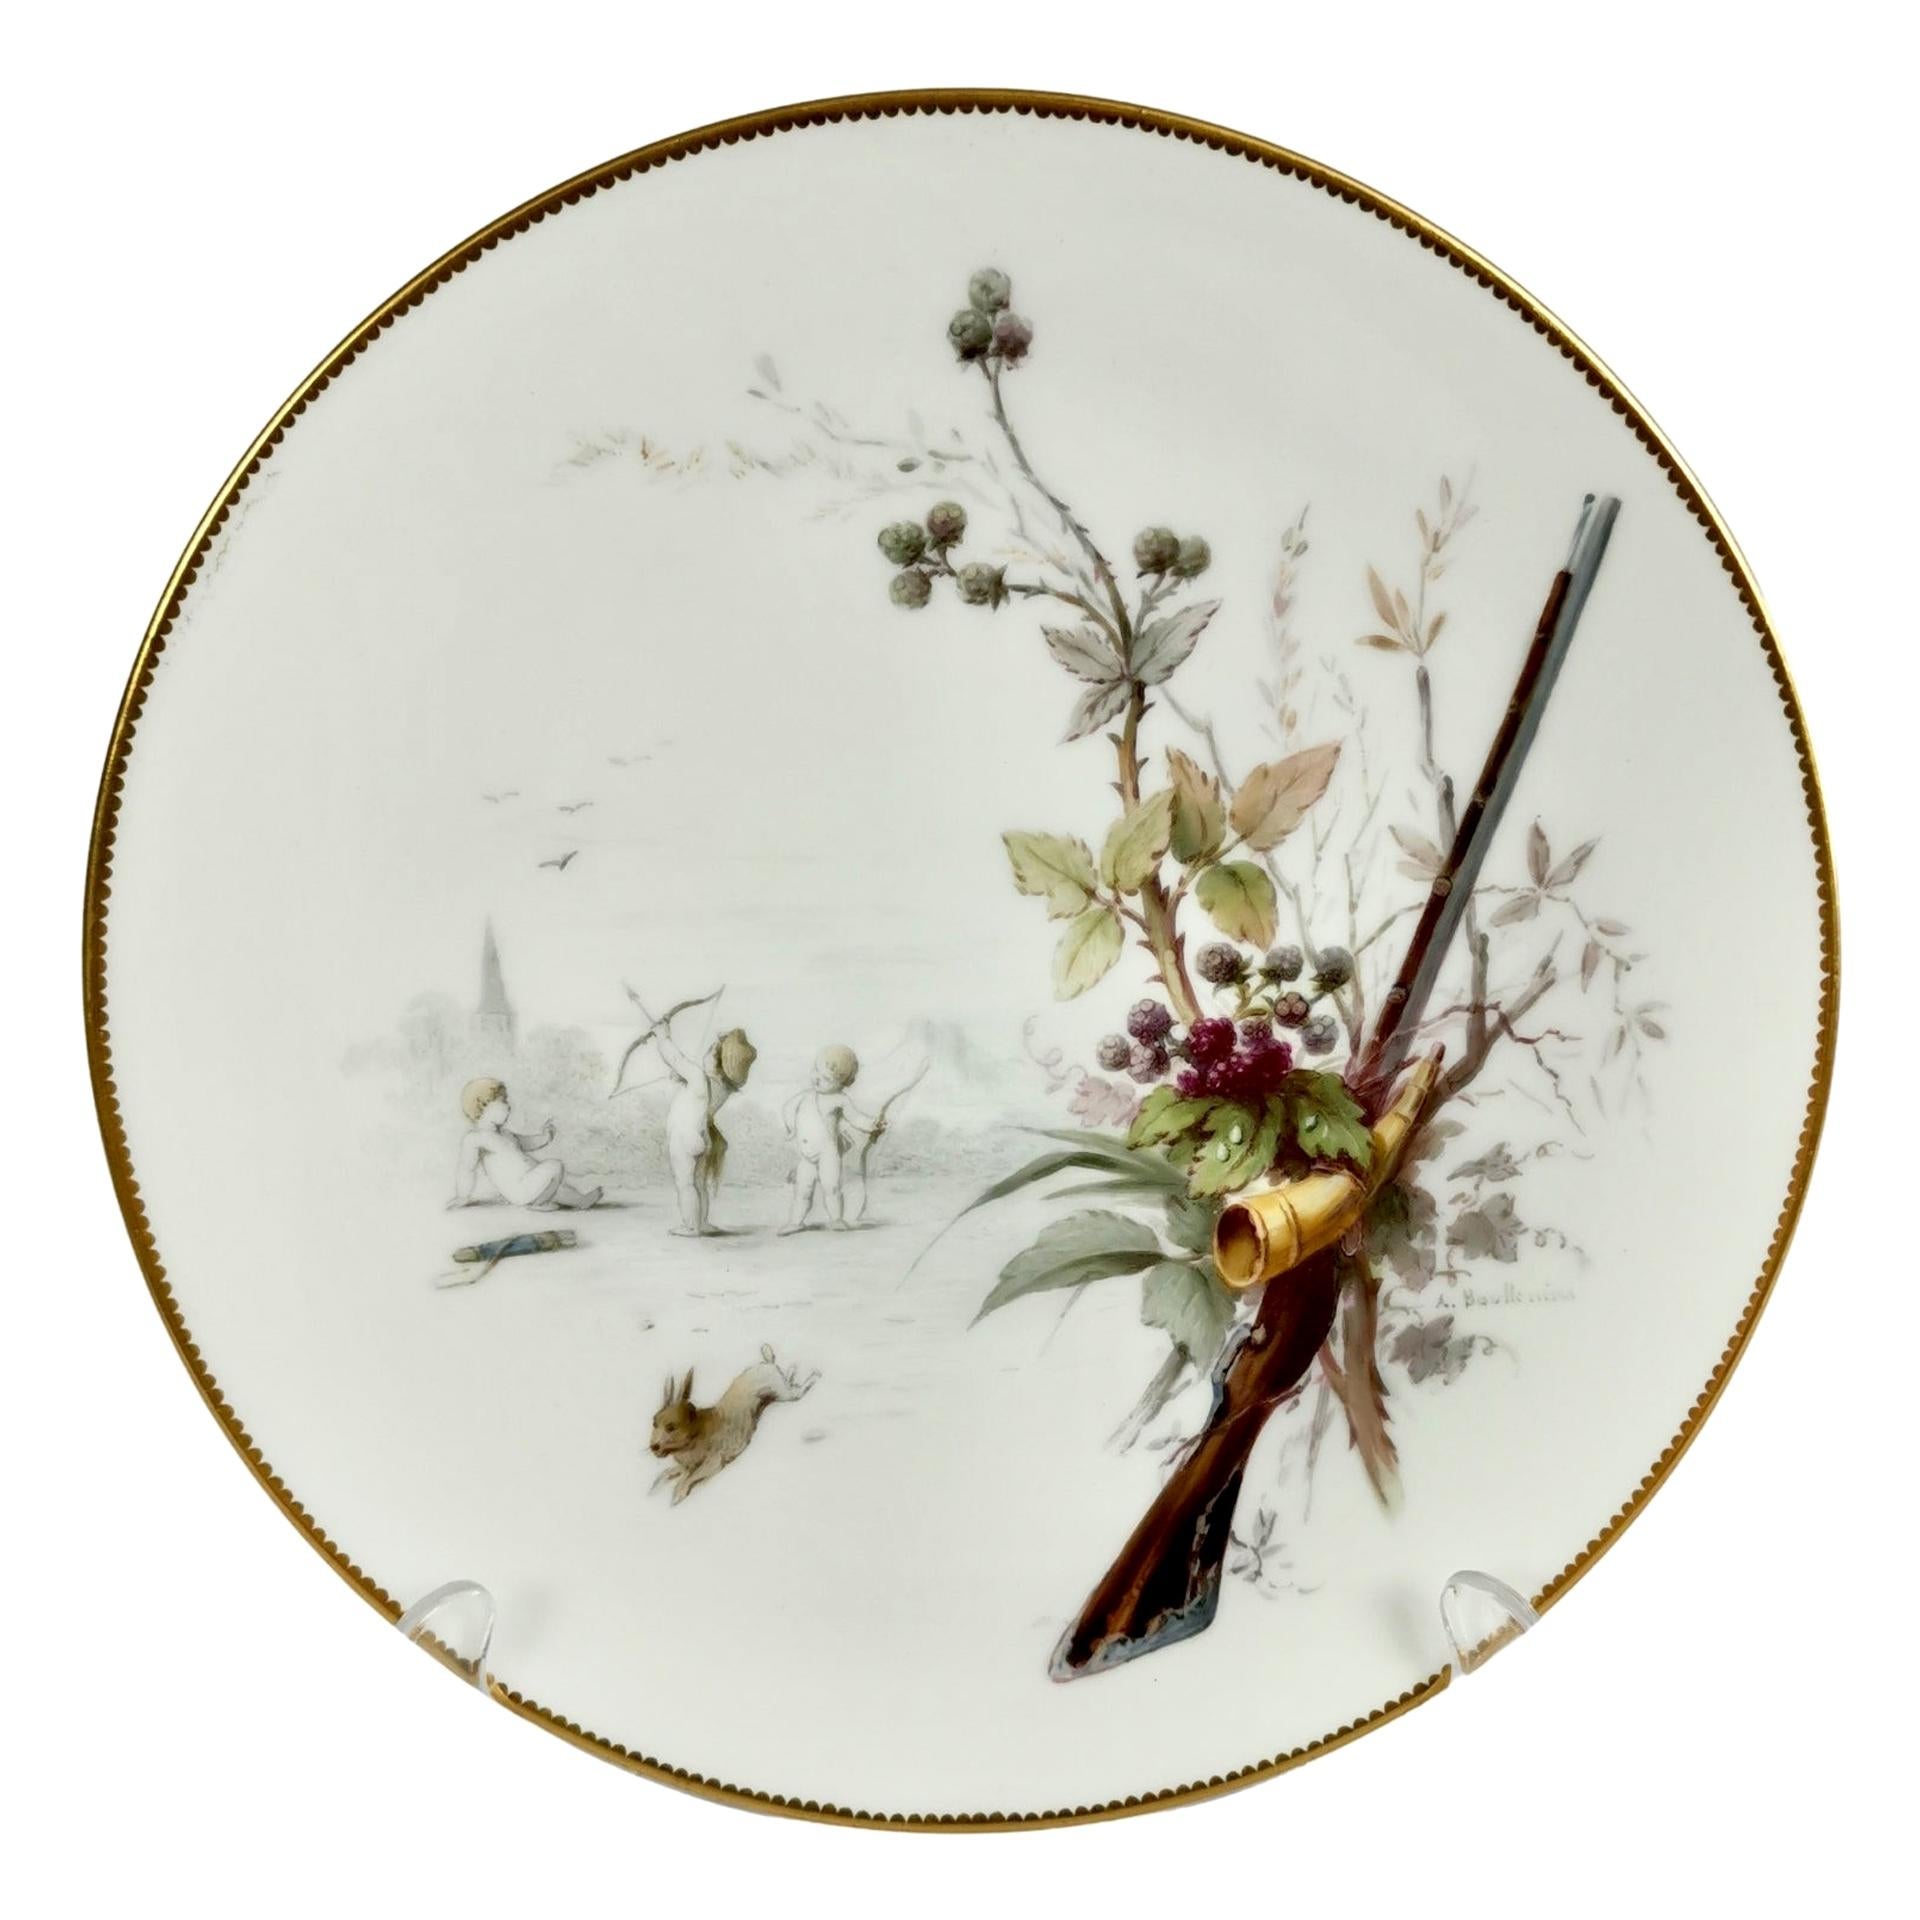 Minton Porcelain Plate, Putti and Rabbit Scene by A. Boullemier, circa 1885